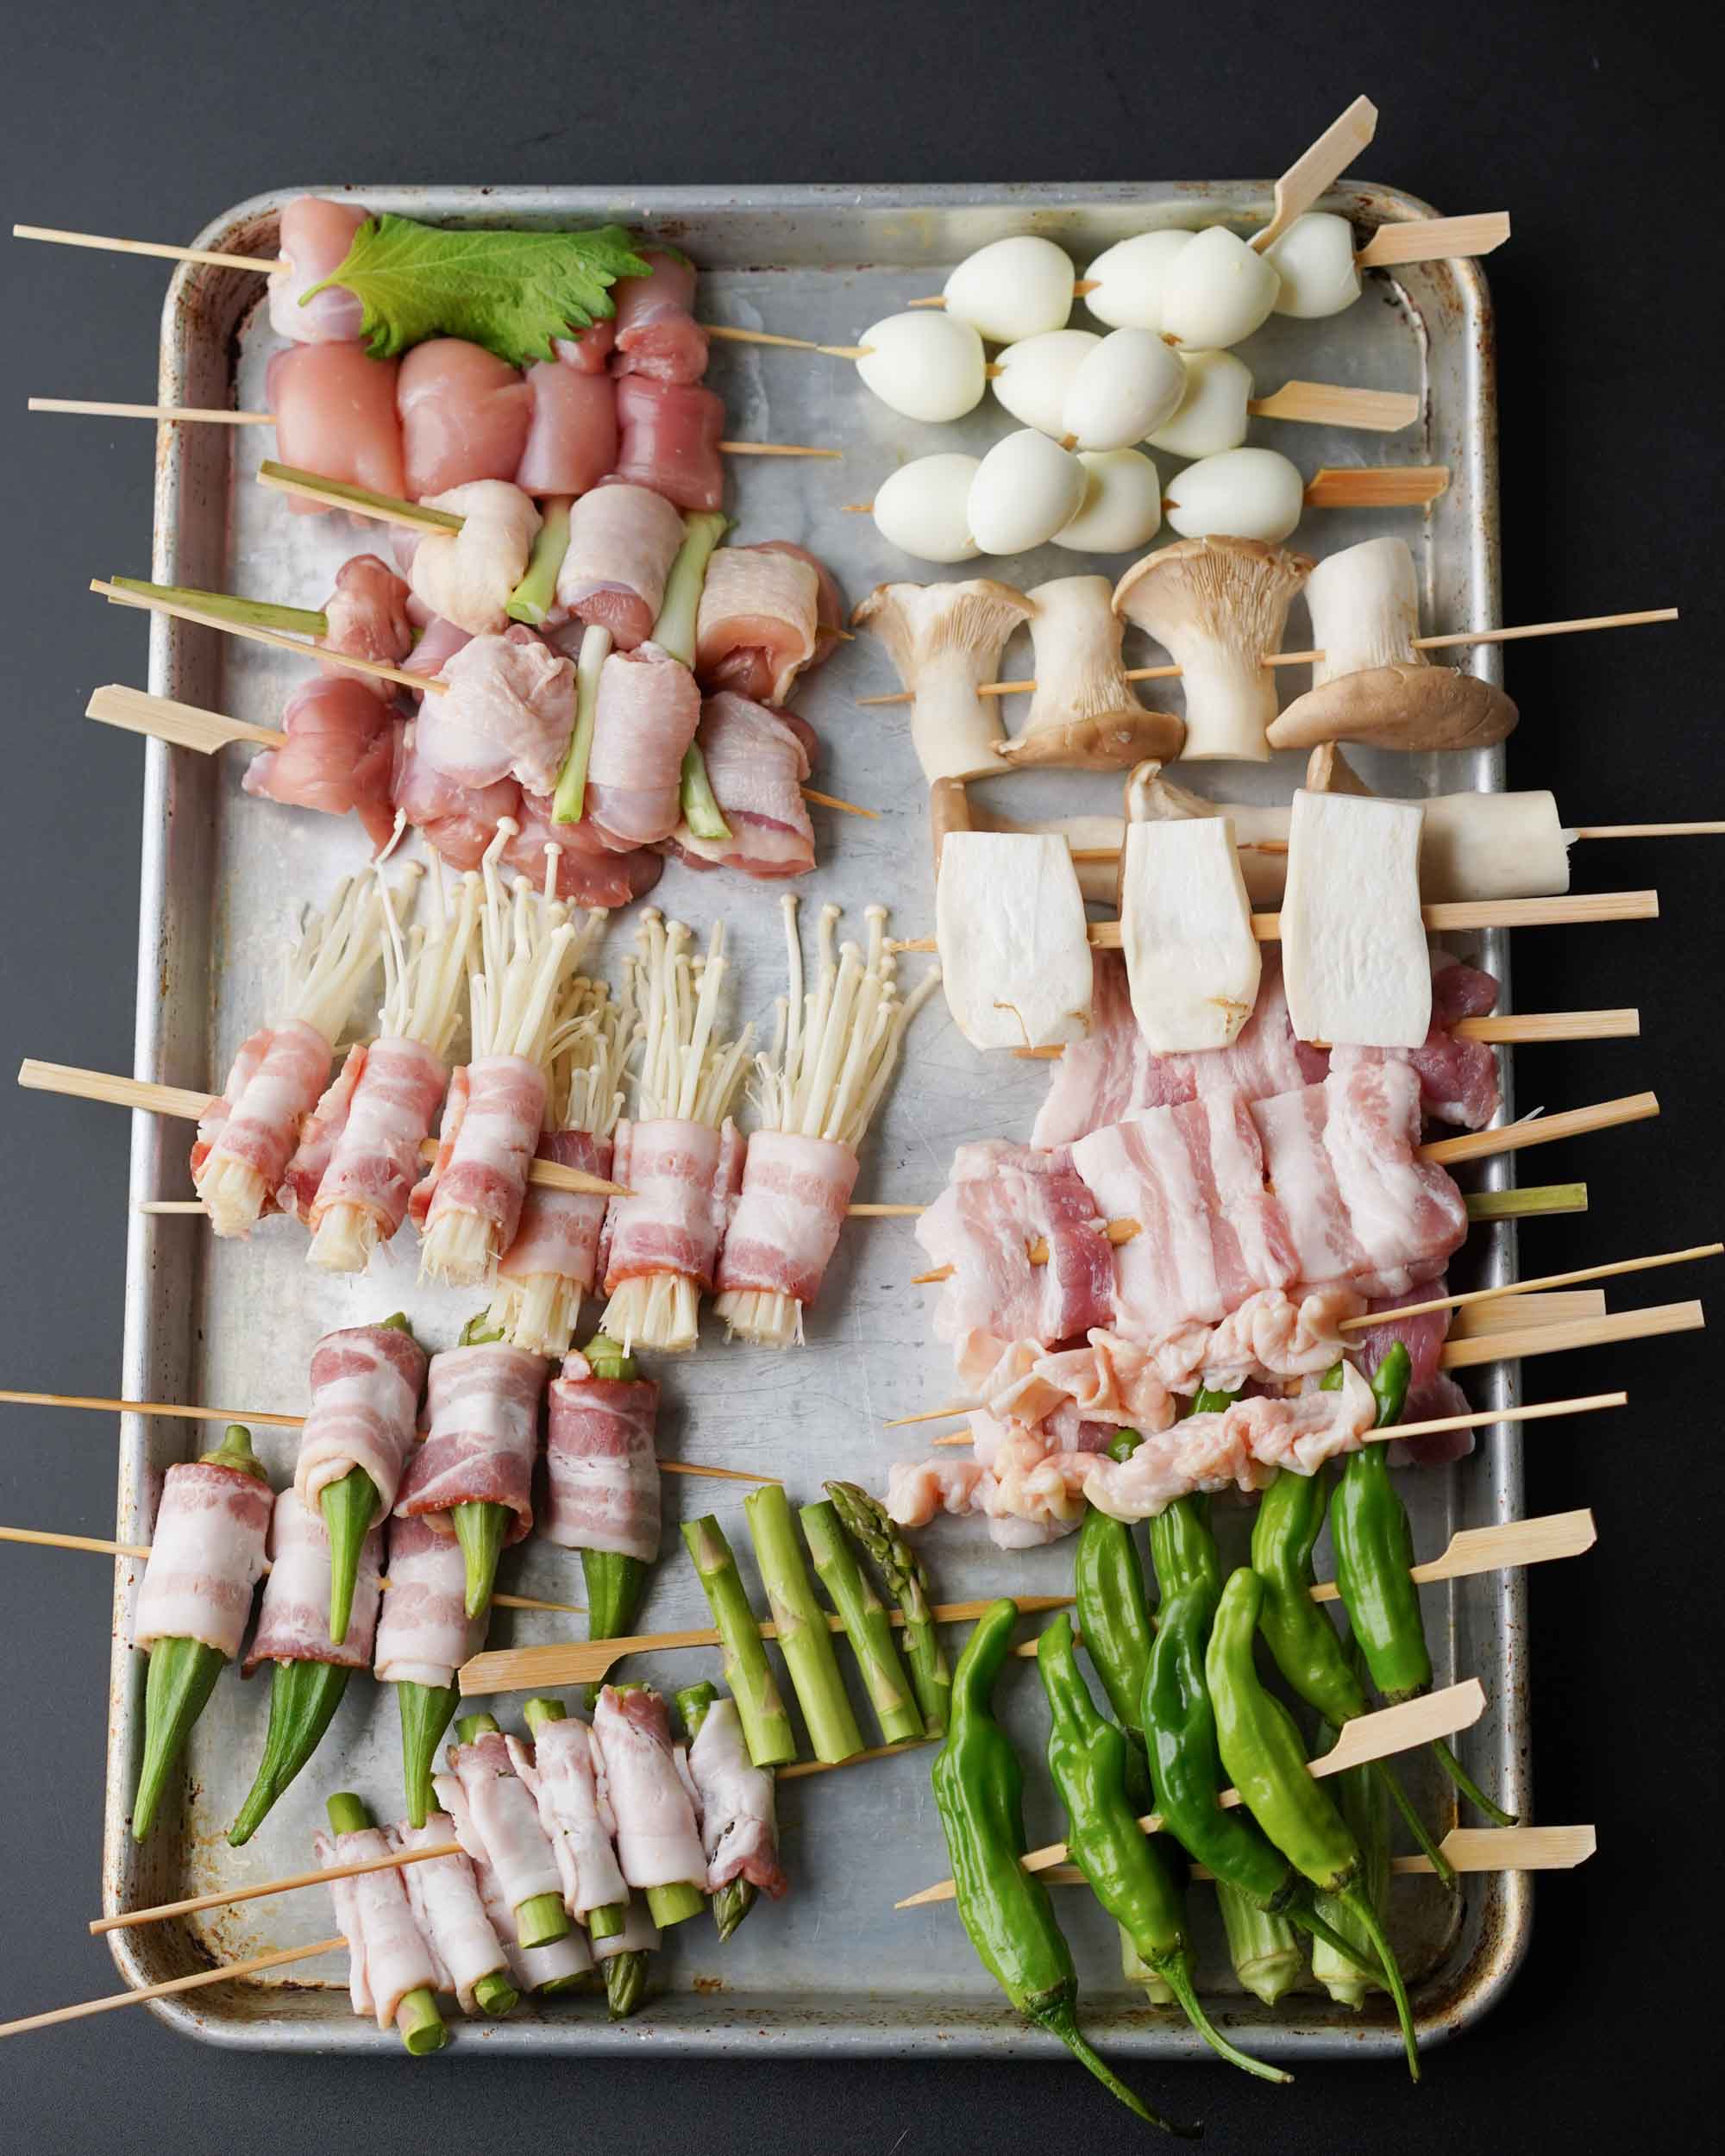 Yakitori - how to make 焼き鳥 successfully at home - Chopstick Chronicles